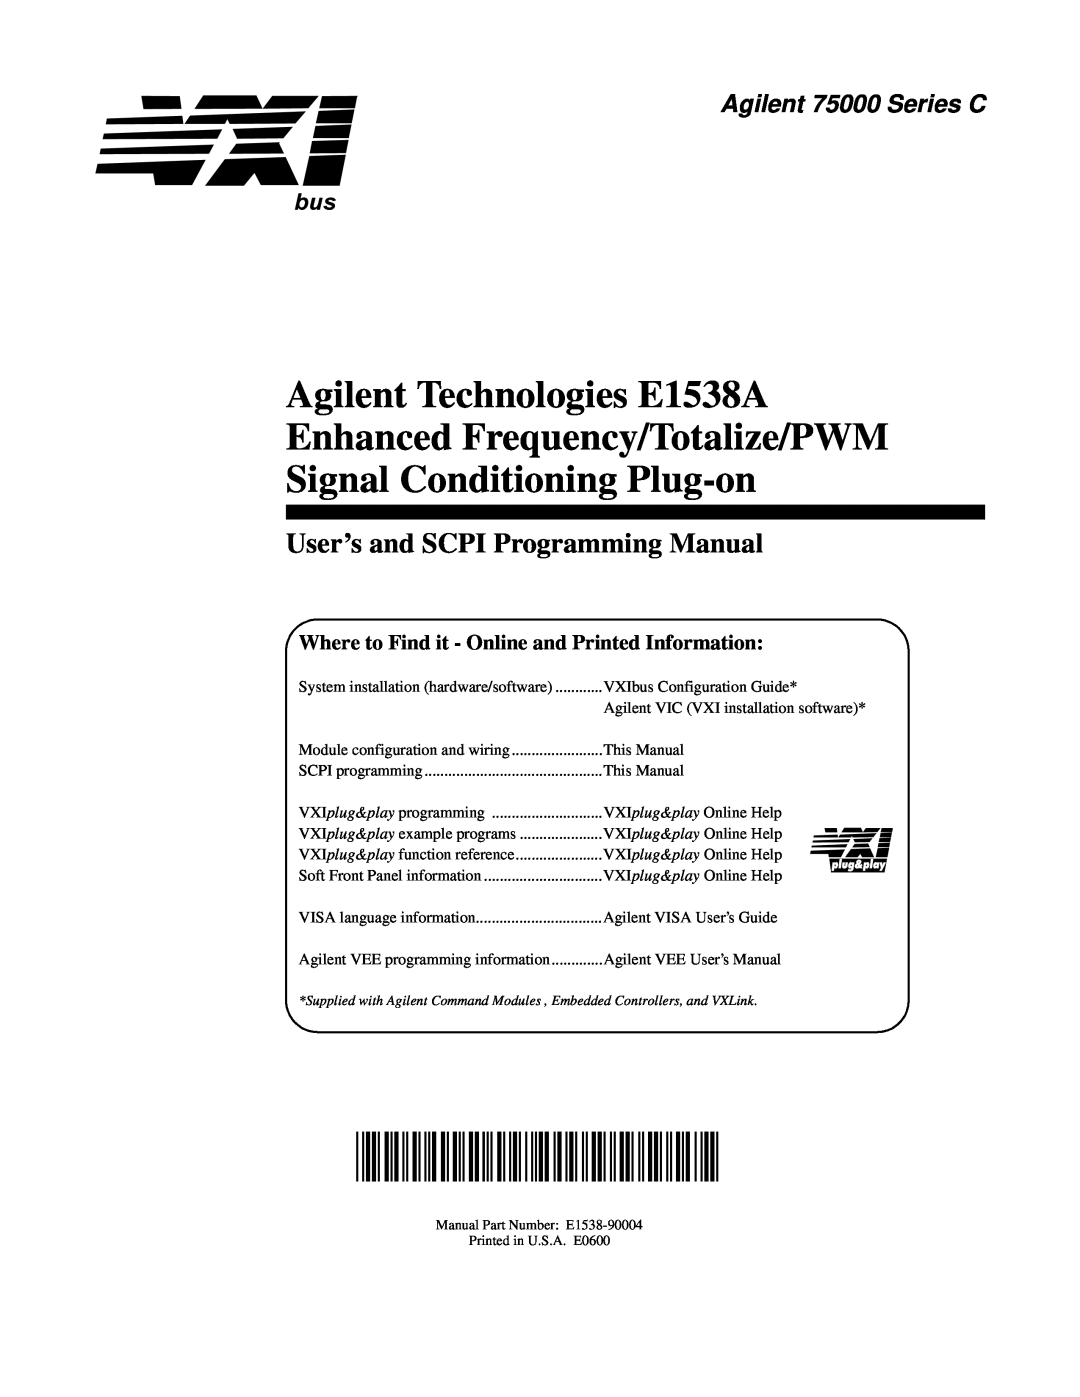 VXI VT1538A user manual User’s and SCPI Programming Manual, Agilent Technologies E1538A Enhanced Frequency/Totalize/PWM 